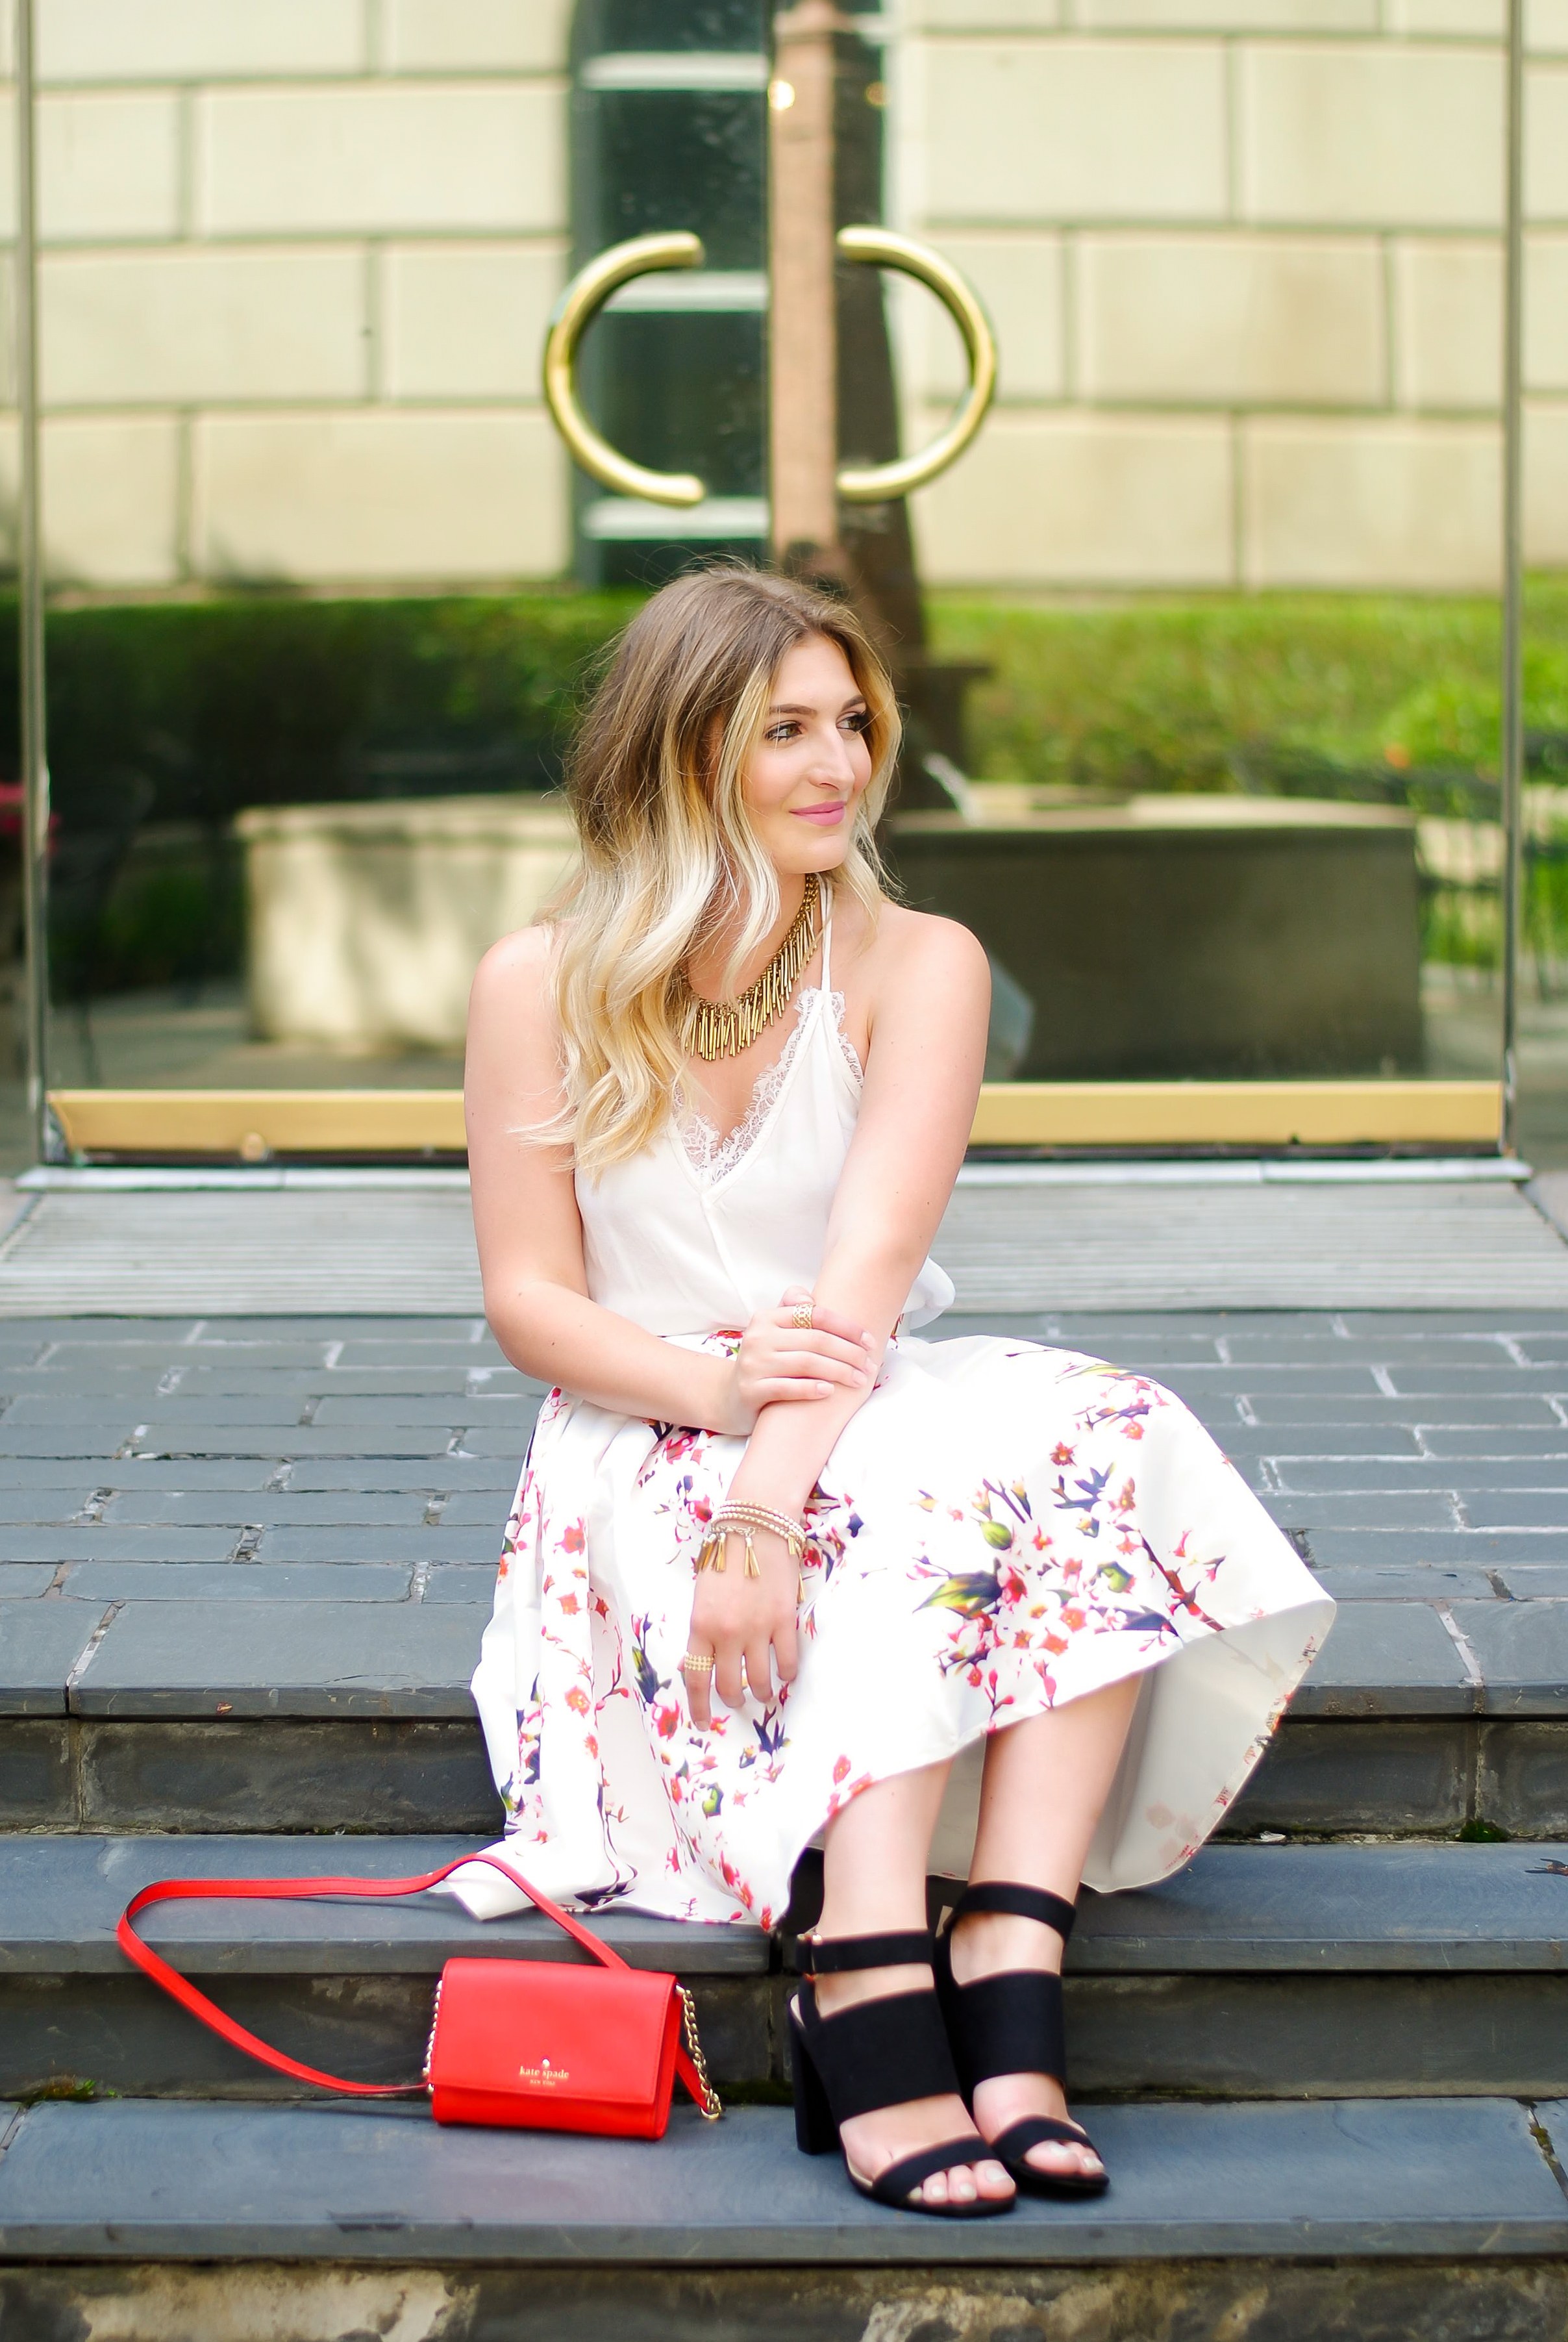 SheIn floral midi skirt look | Audrey Madison Stowe Blog